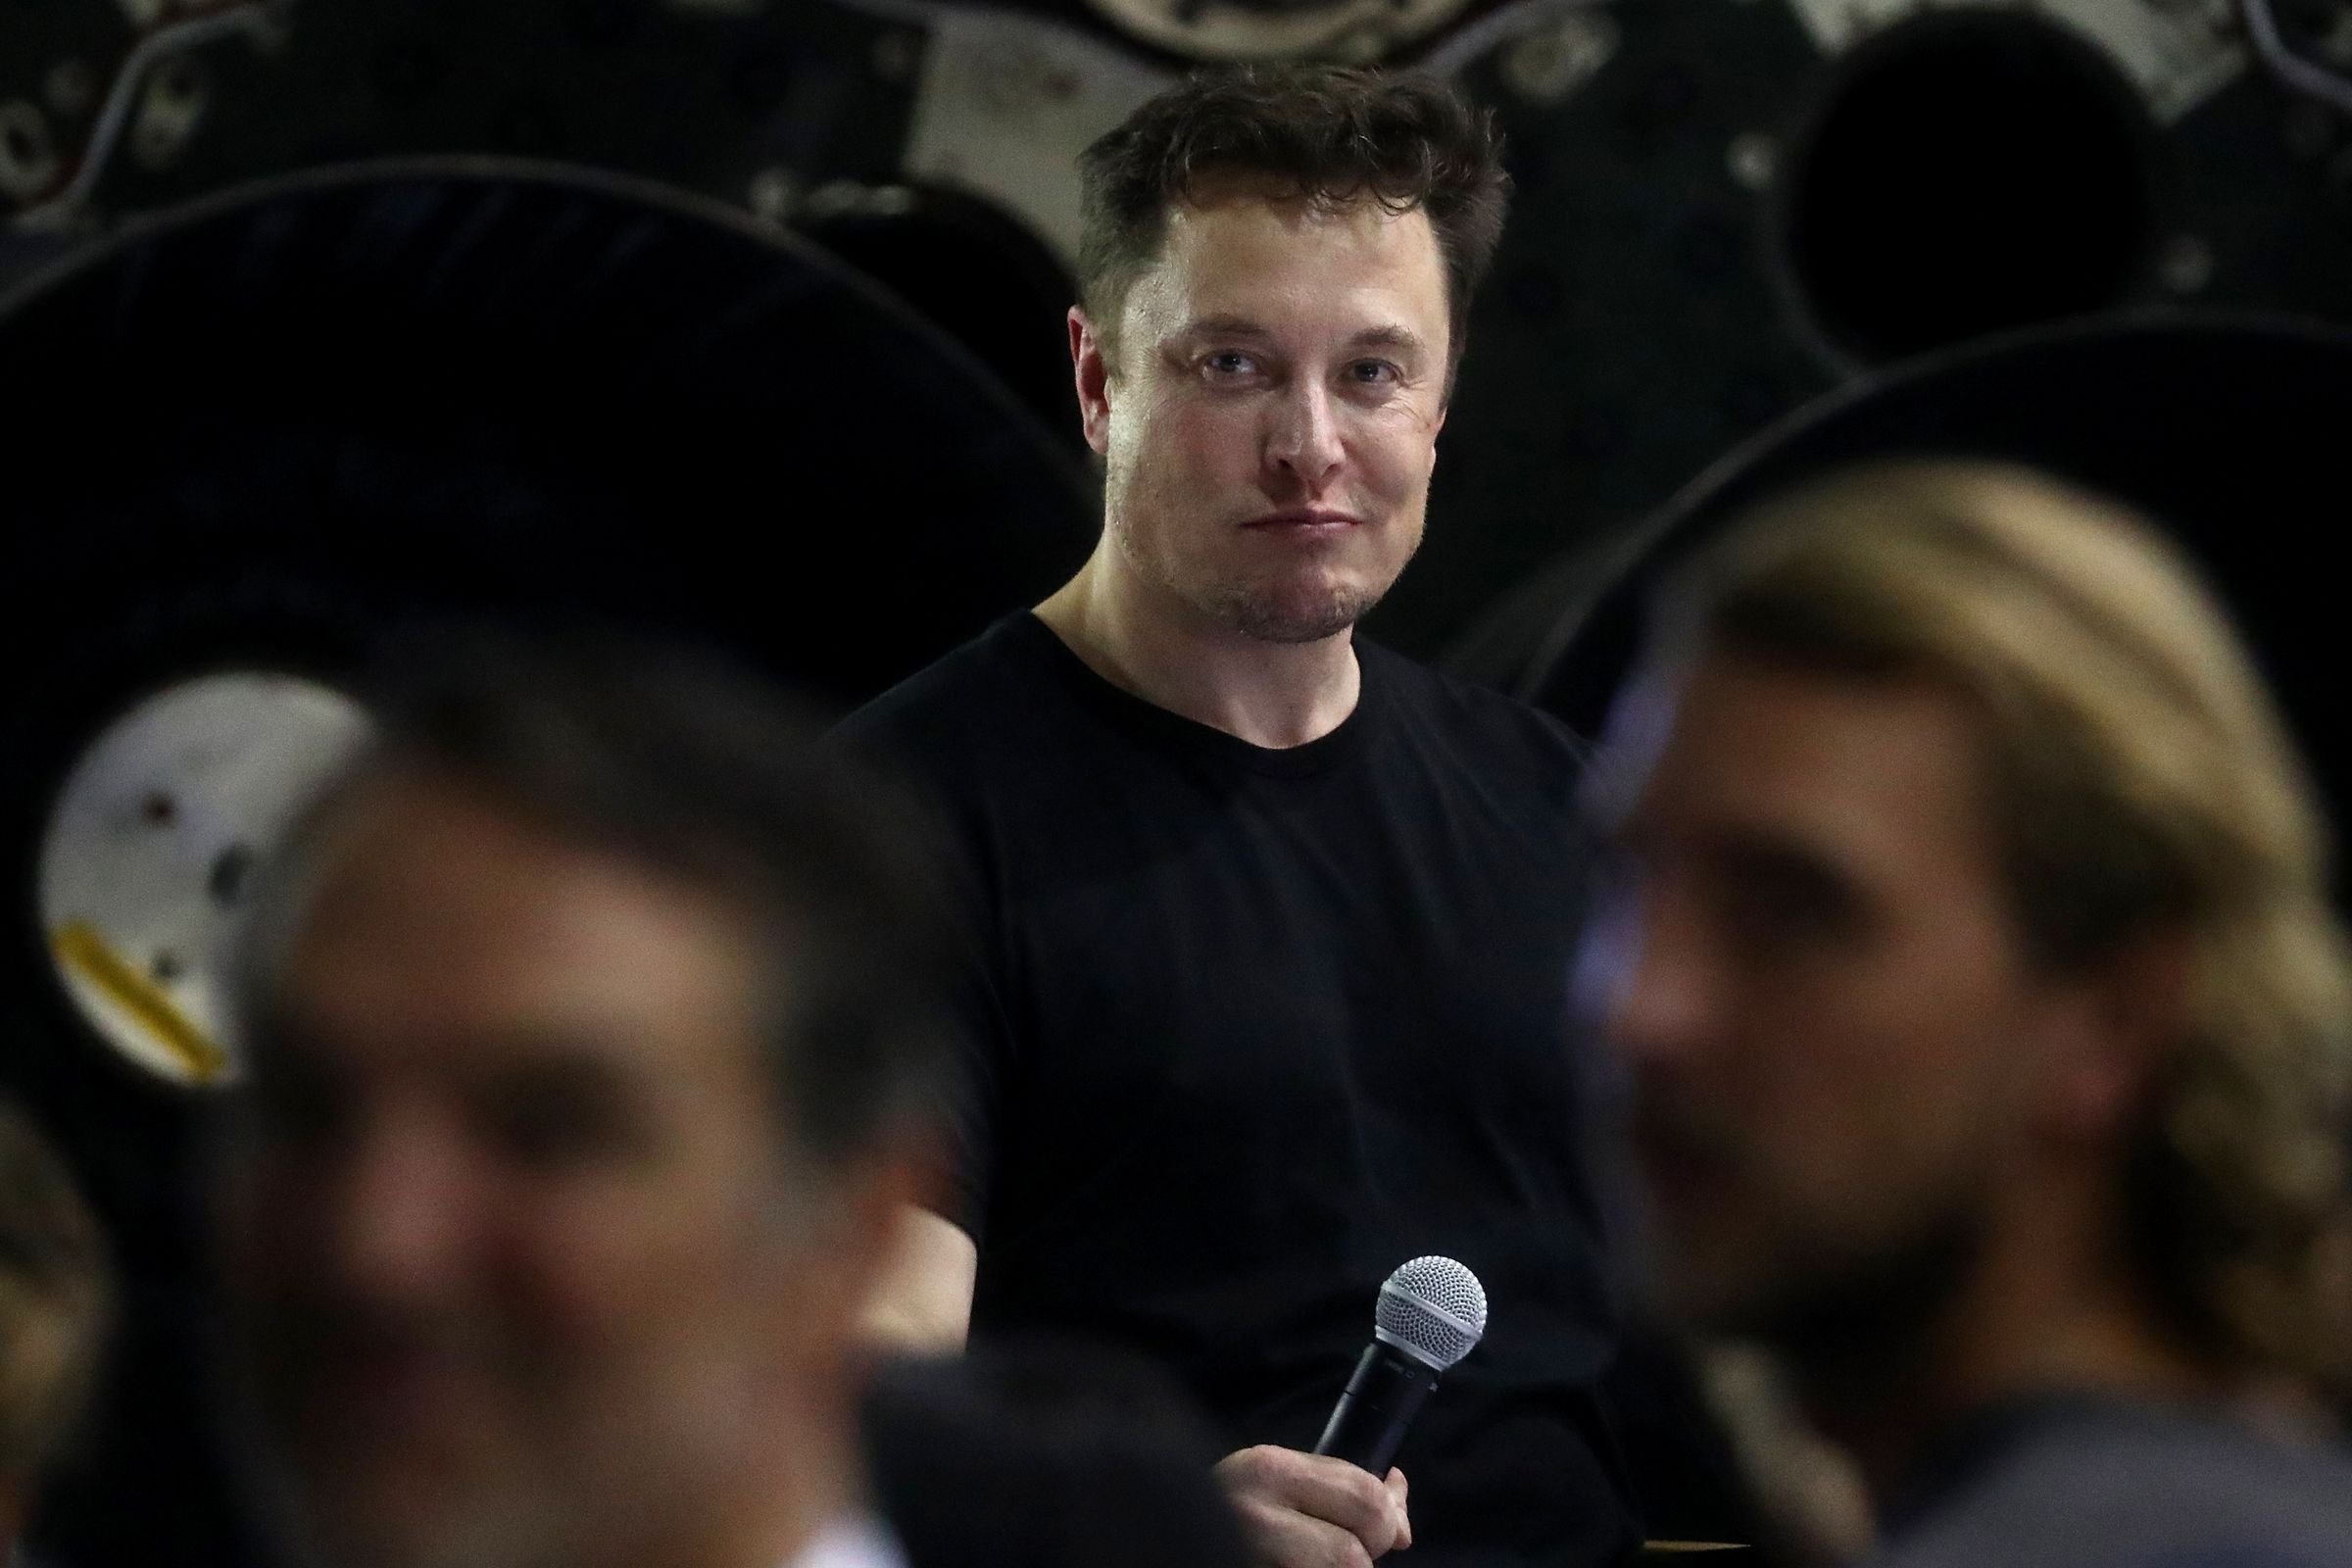 SpaceX CEO Elon Musk Announces First Private Passenger flight To The Moon